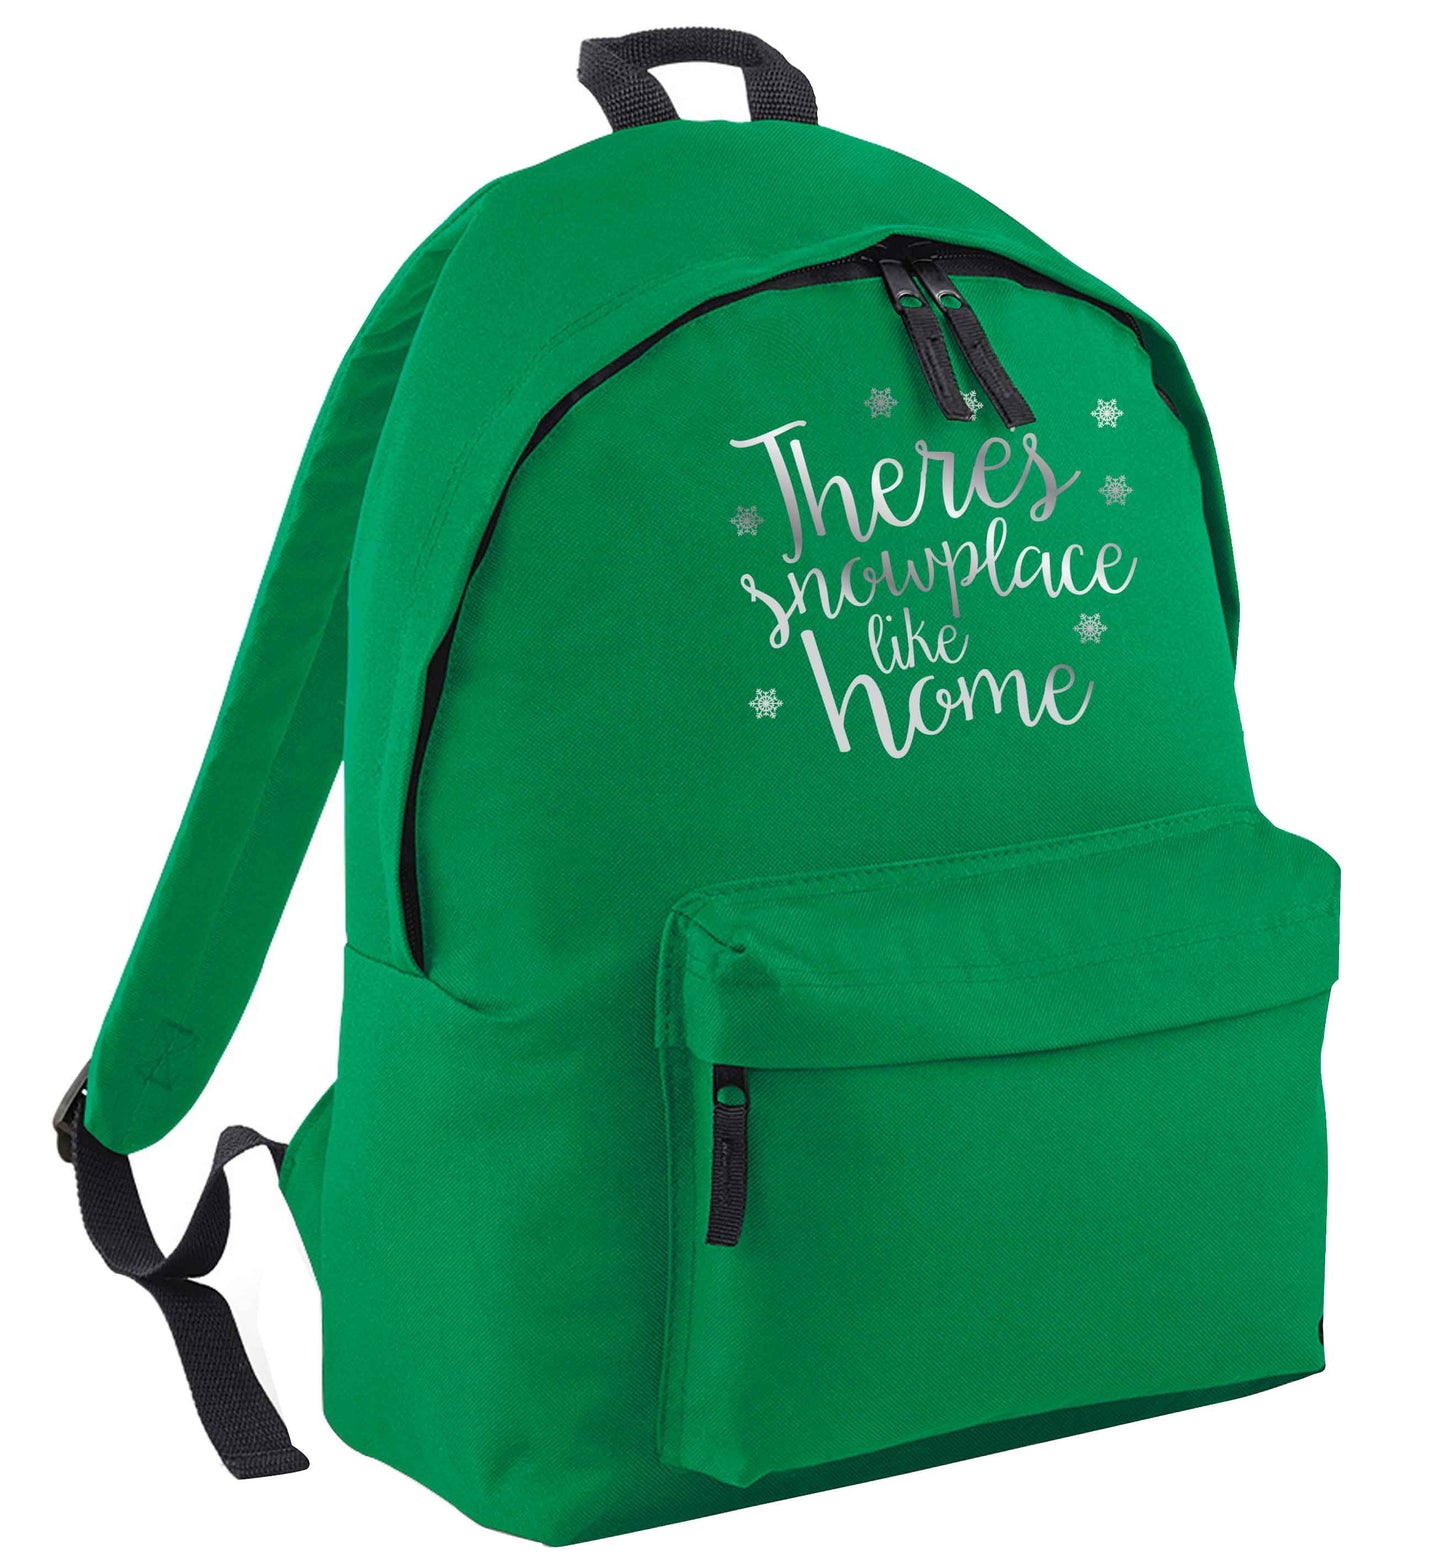 There's snowplace like home - metallic silver green adults backpack